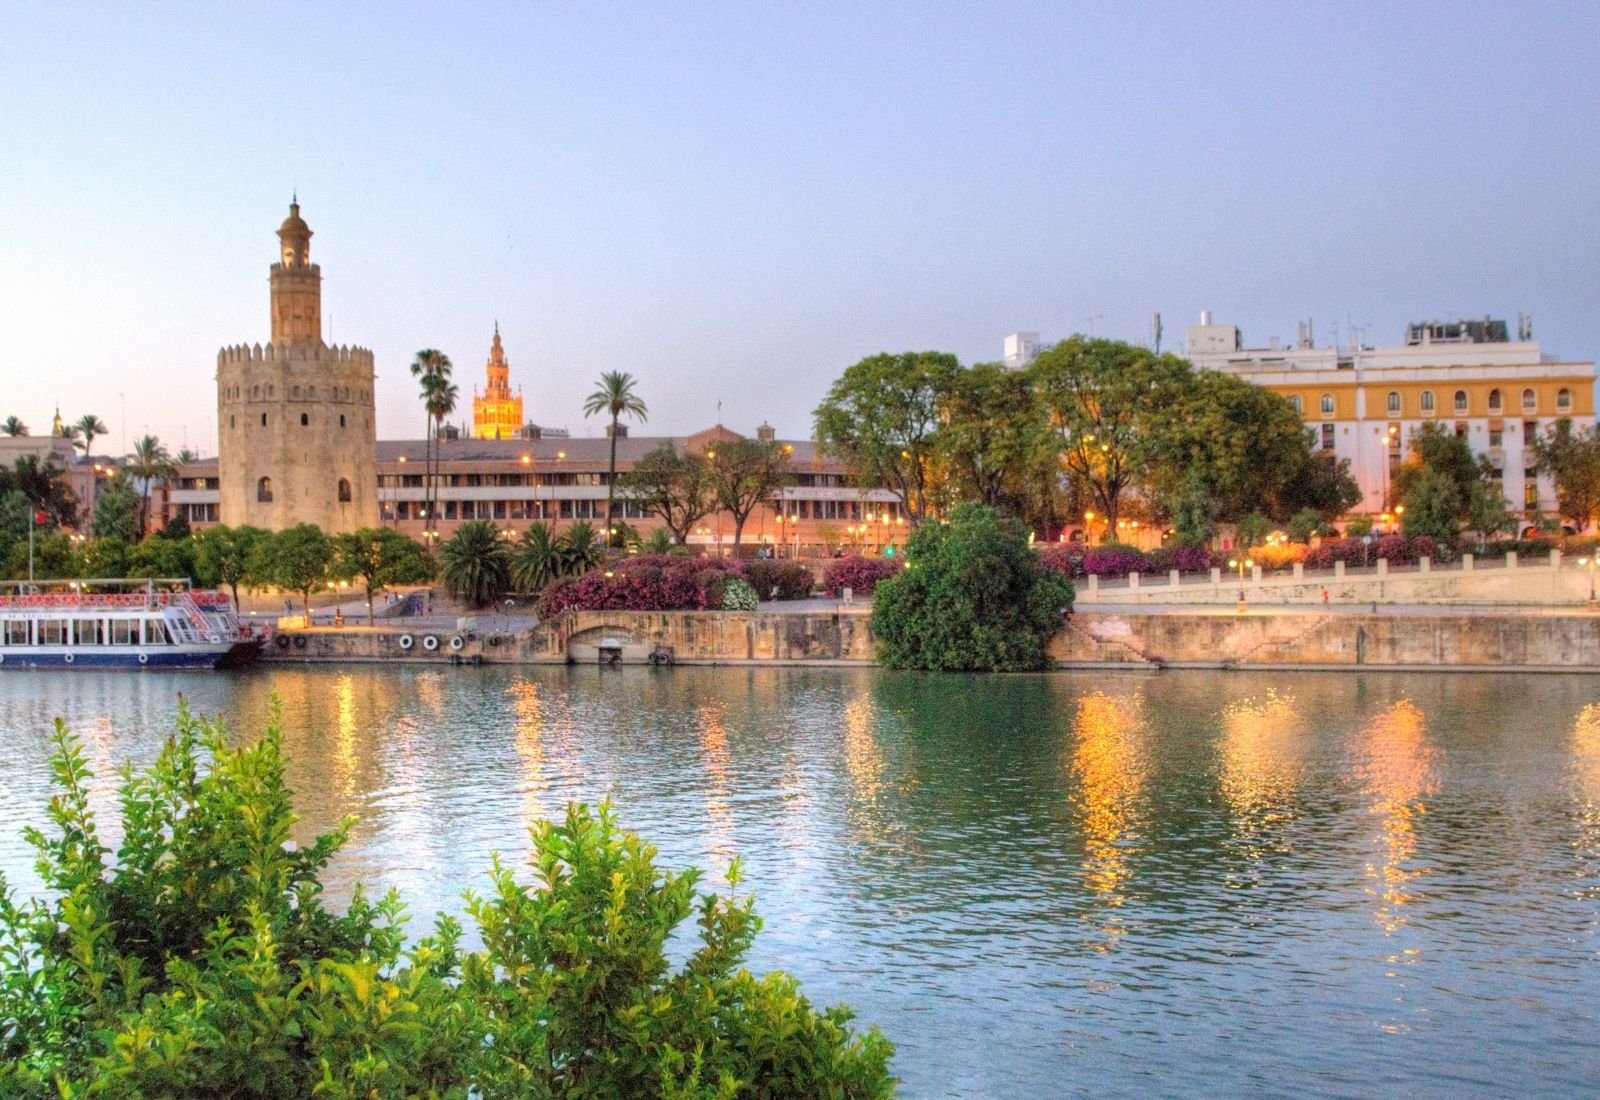 A photo of the Torre del Oro near the Guadalquivir river.